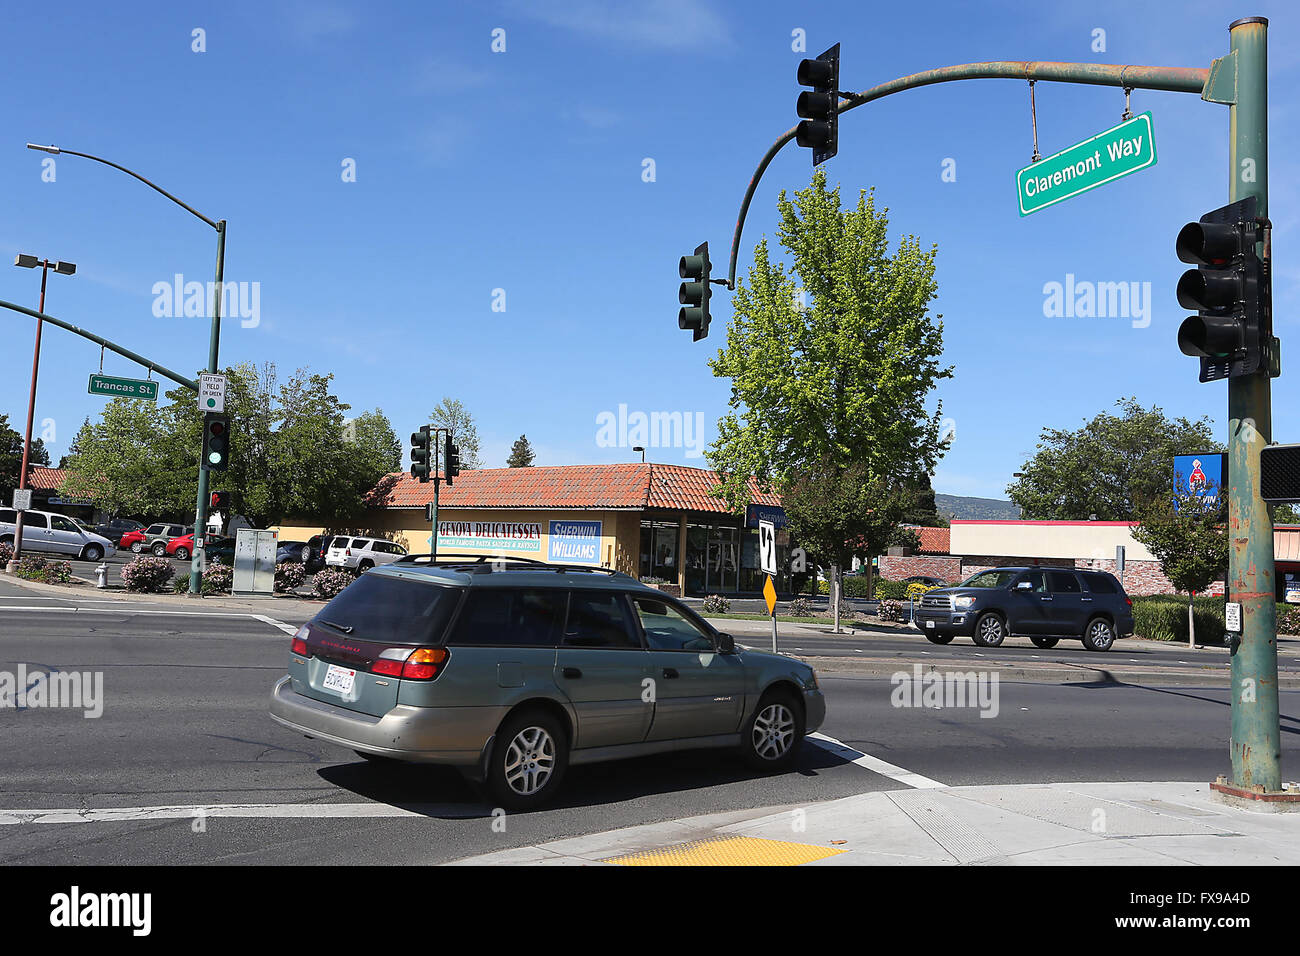 April 5, 2016 - Napa, CA, U.S. - This intersection, at Claremont Way and Trancas Street, is one of 26 traffic signals that the city of Napa and Caltrans will study in a signal timing study after receiving a grant from the Metropolitan Transportation Commission. (Credit Image: © Napa Valley Register via ZUMA Wire) Stock Photo